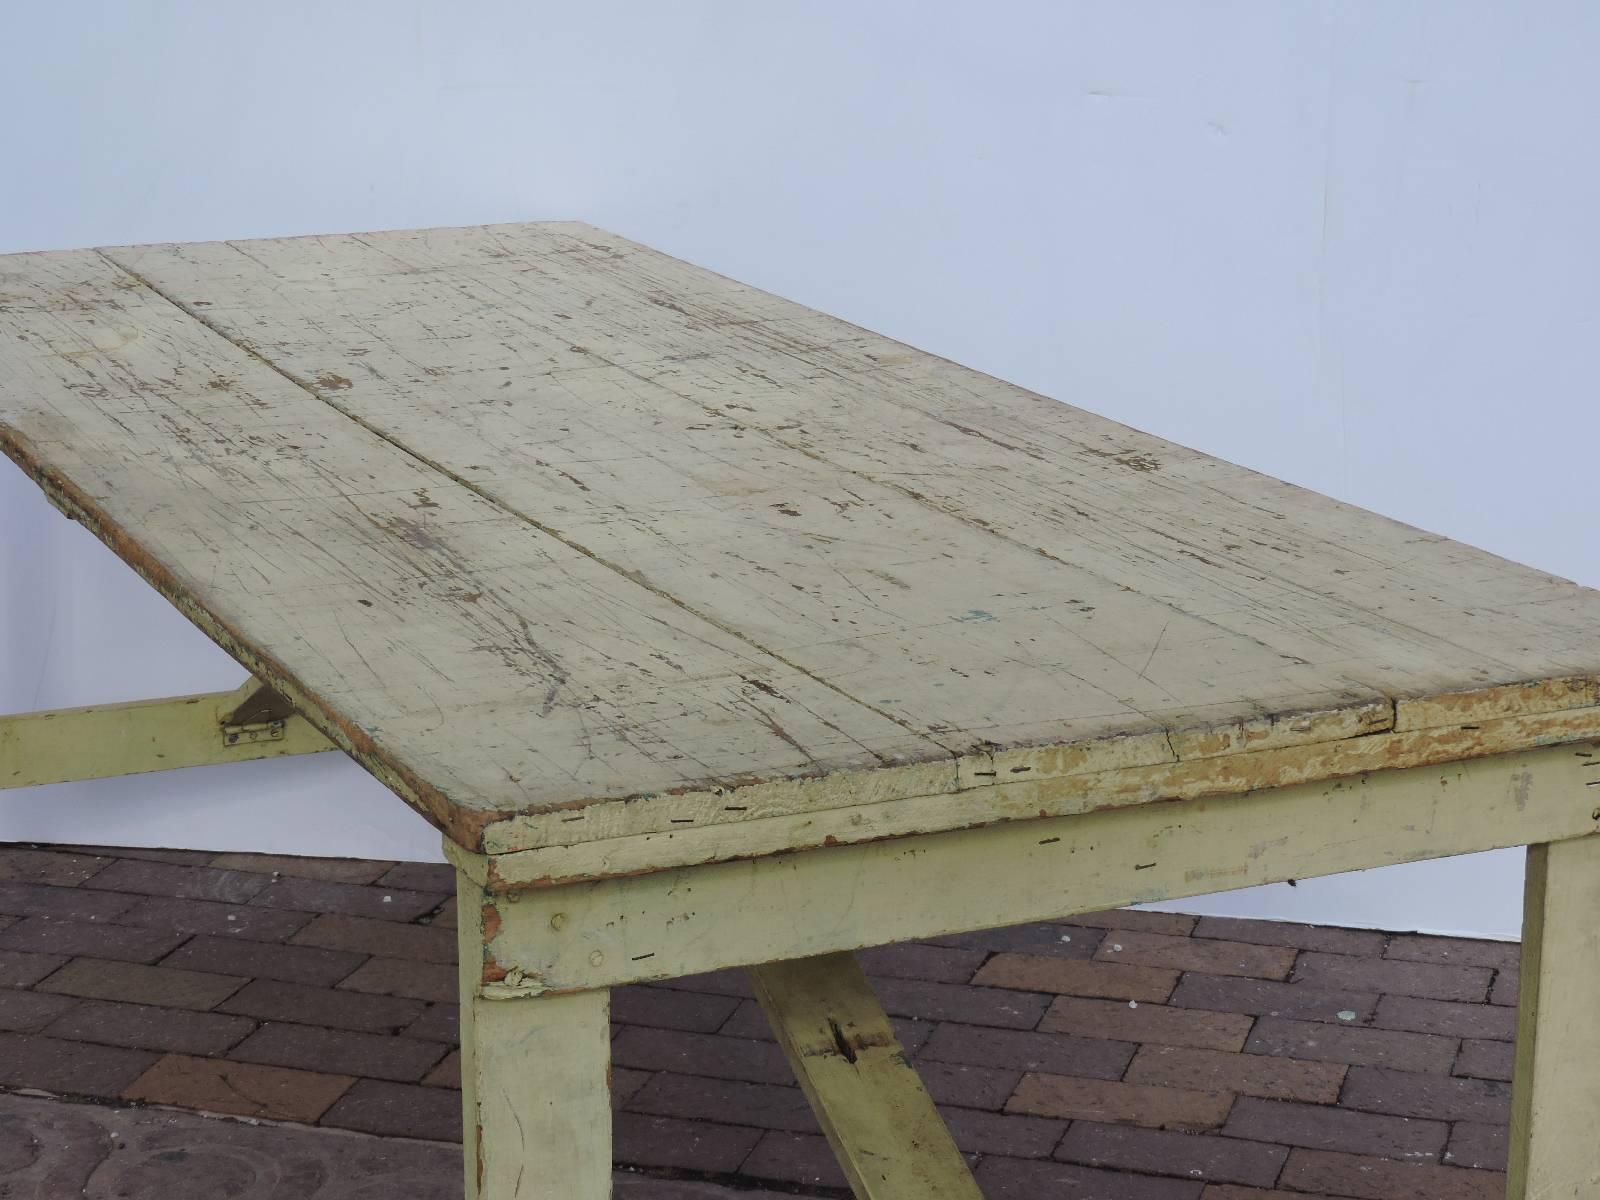 Folding collapsible leg farm harvest Grange work dining table in beautifully aged worn old pale yellow painted surface. A very versatile designed table perfect for indoor or outdoor dining as the legs fold under tabletop for easy transport and